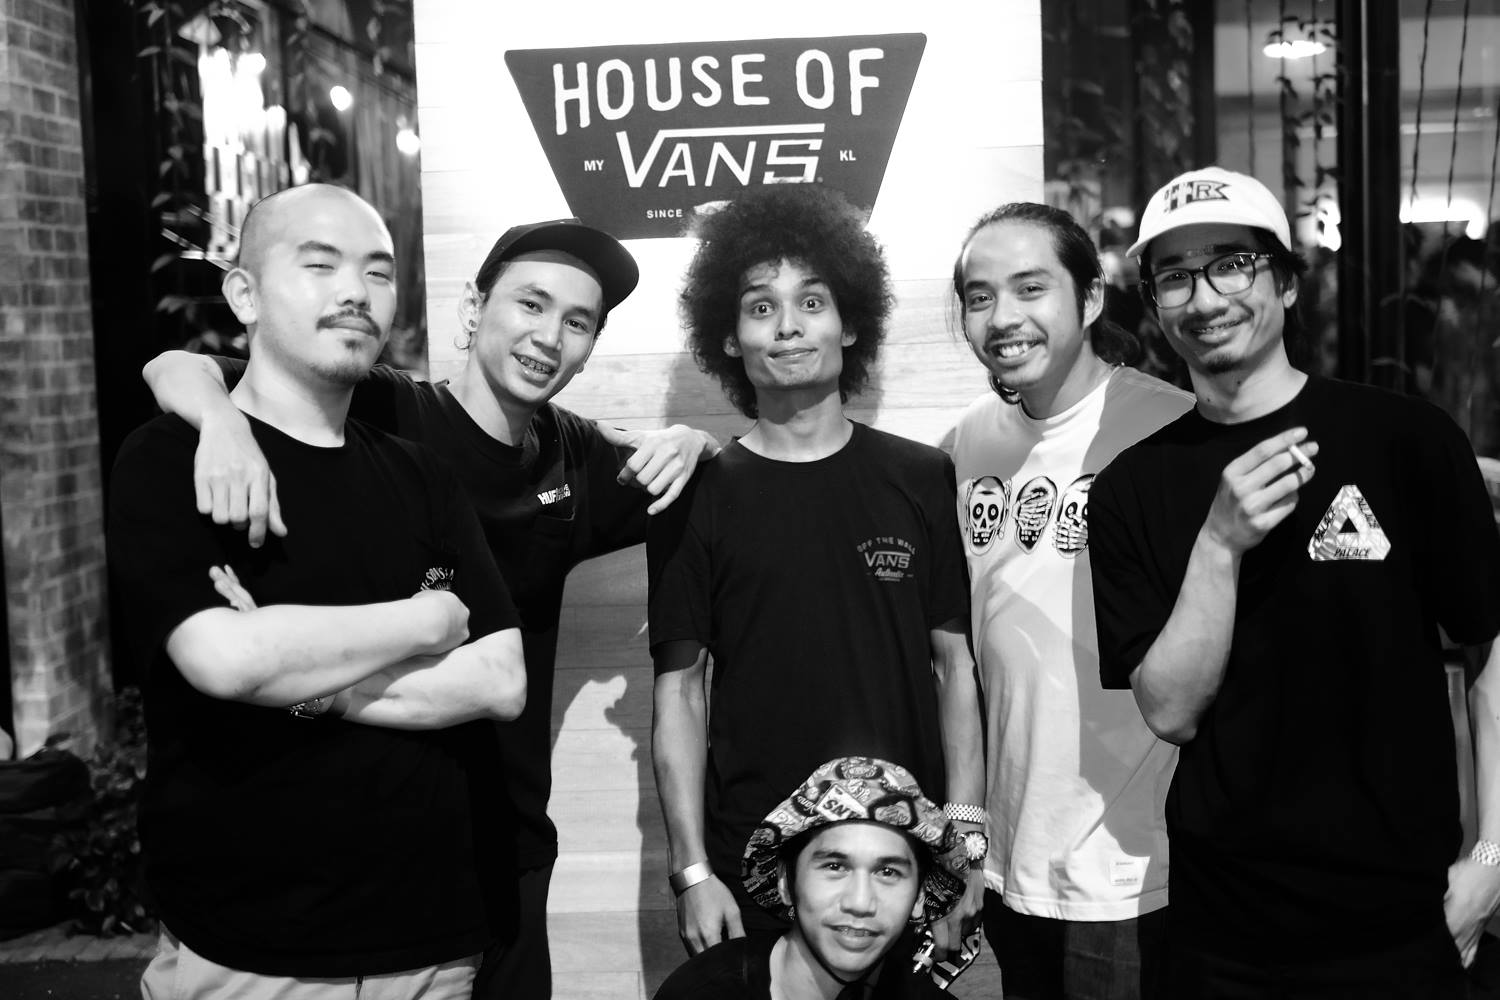 House of Vans KL 2016 skate competition winner, Azreen Azman (middle), with his KL crew / Photo: Azam Saad